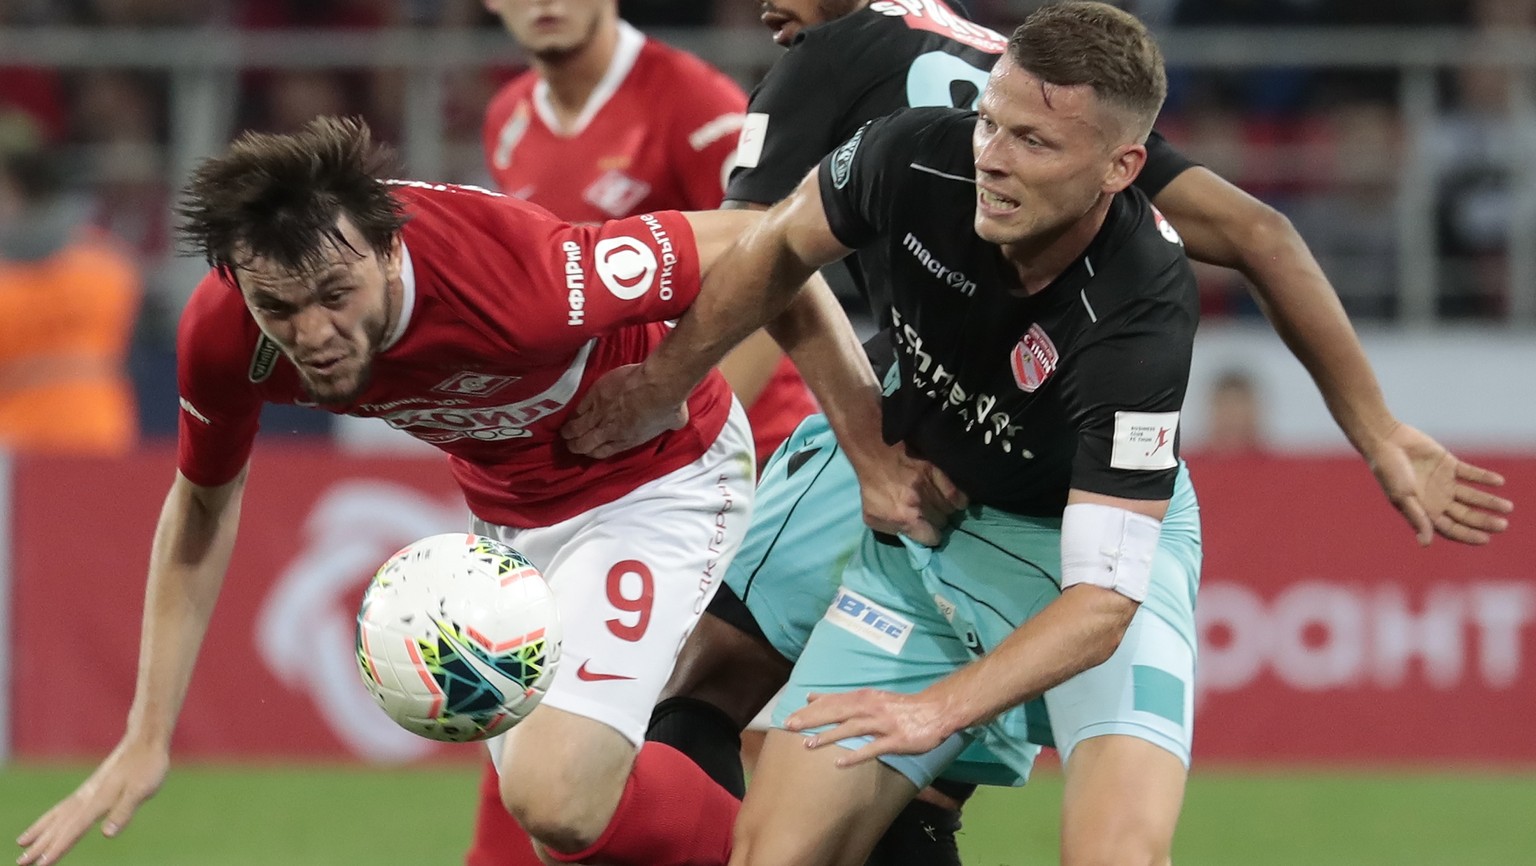 epa07775093 Reziuan Mirzov (L) of Spartak Moscow in action against Stefan Glarner (R) of FC Thun during UEFA Europa League third qualifying round, second leg, soccer match between Spartak Moscow and F ...